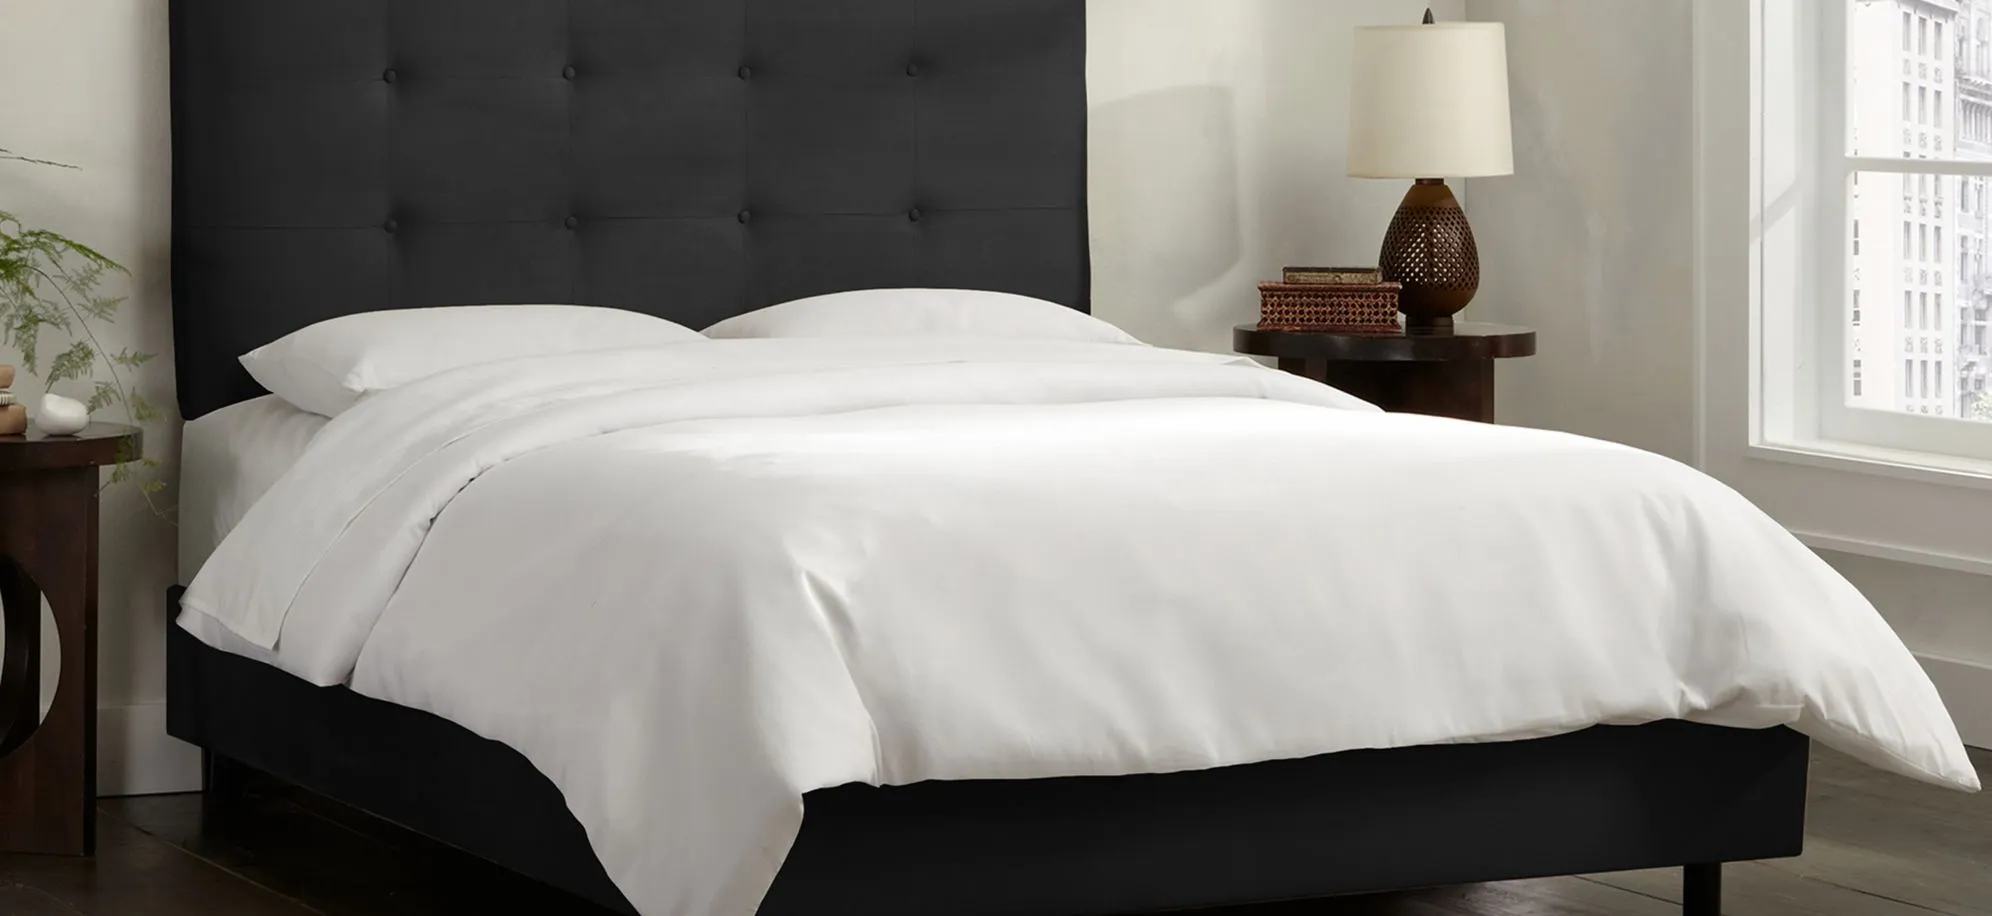 Nathan Bed in Premier Black by Skyline